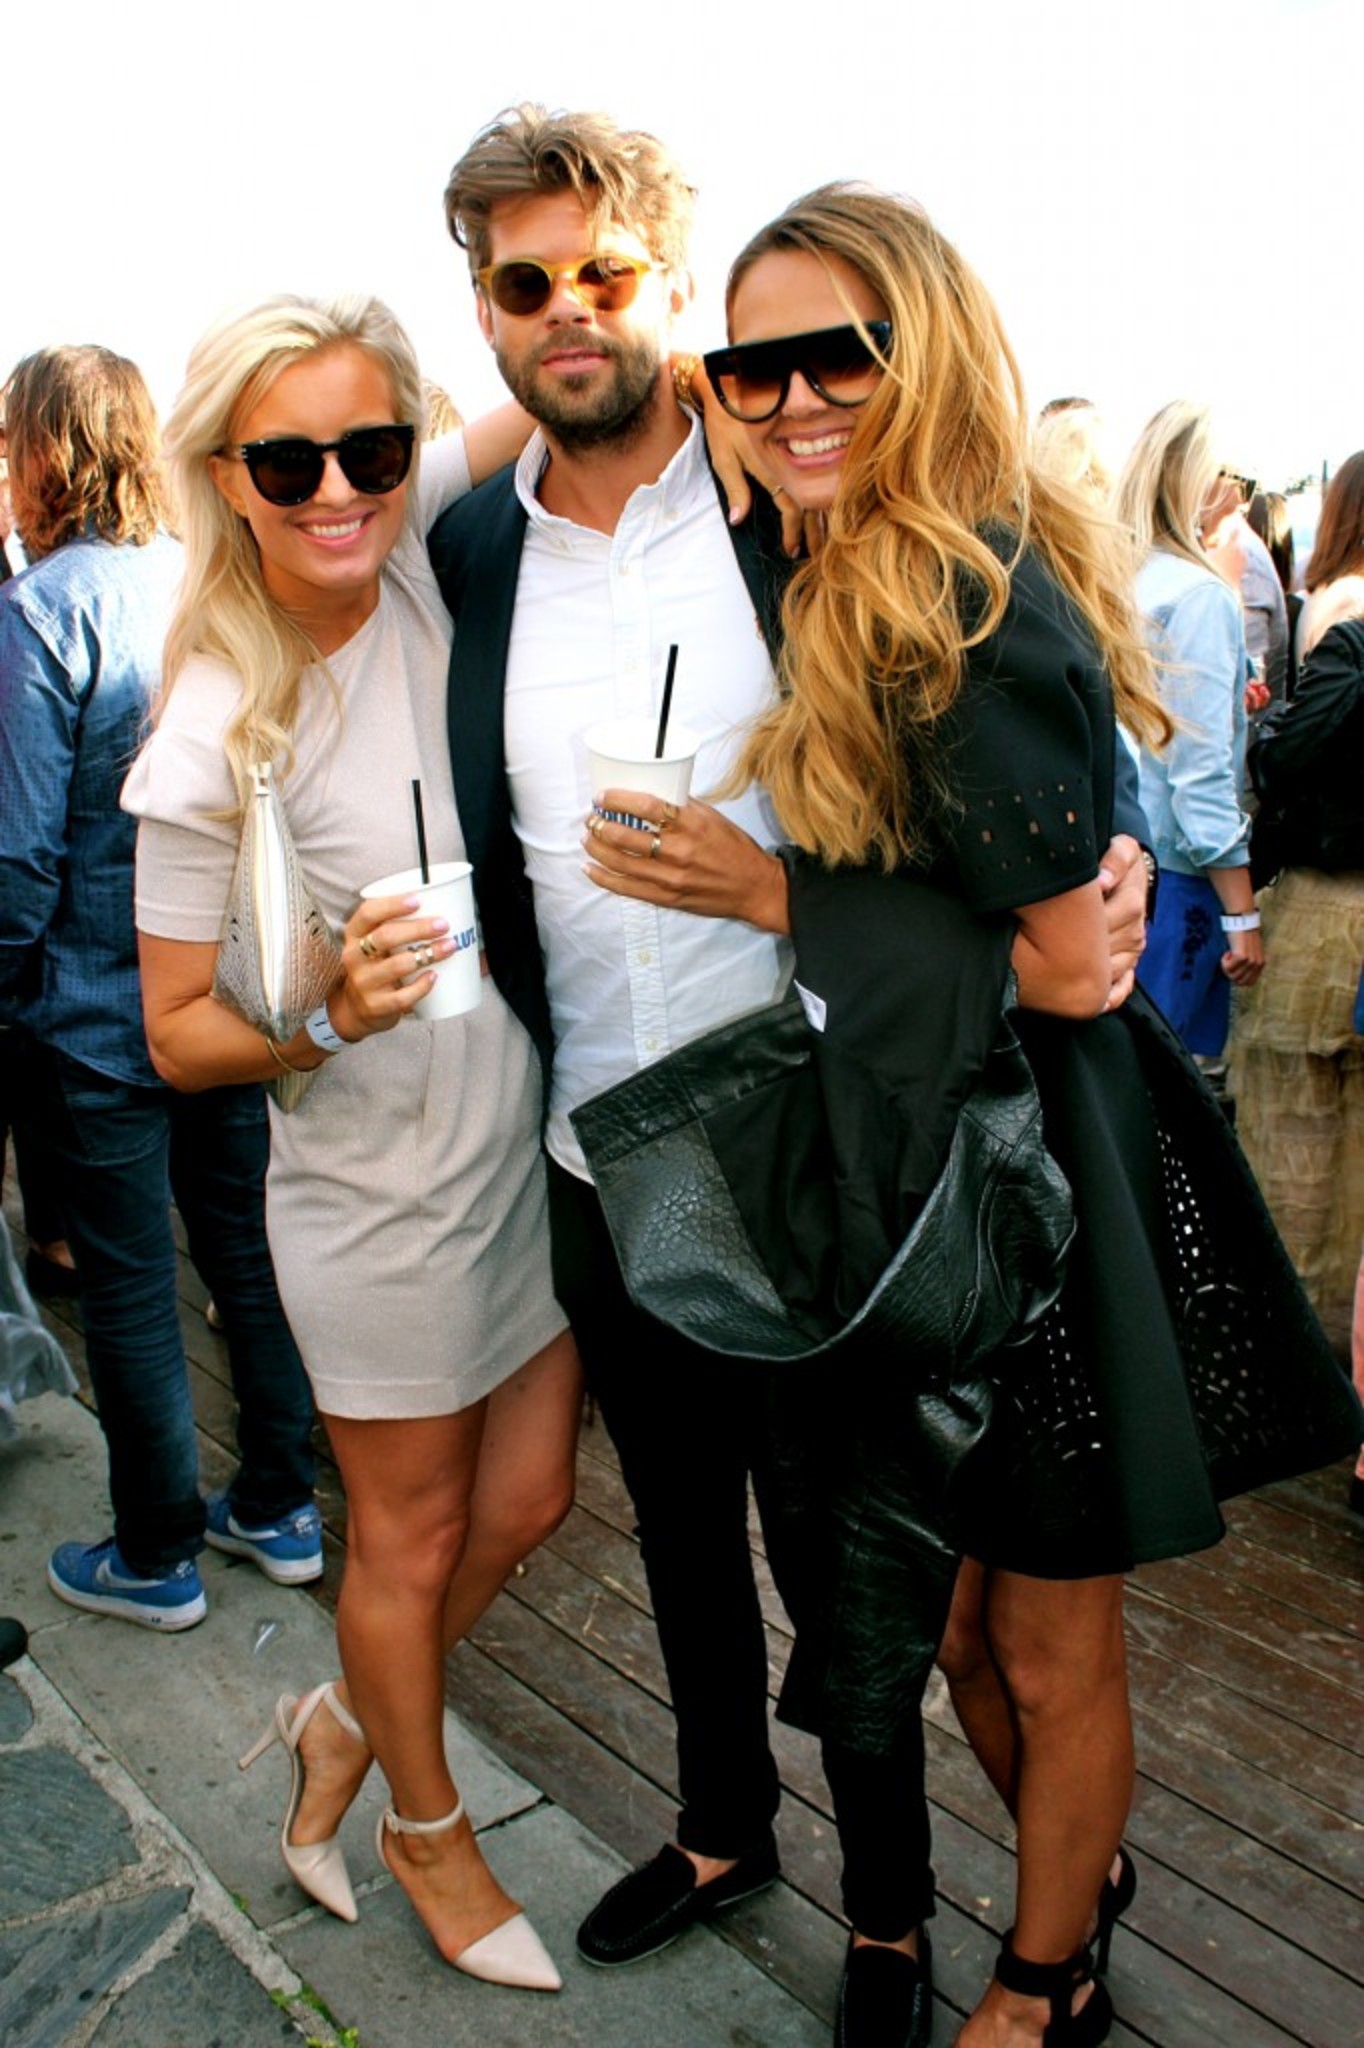 Hedda Skaug with her hubby and Camilla Abry!